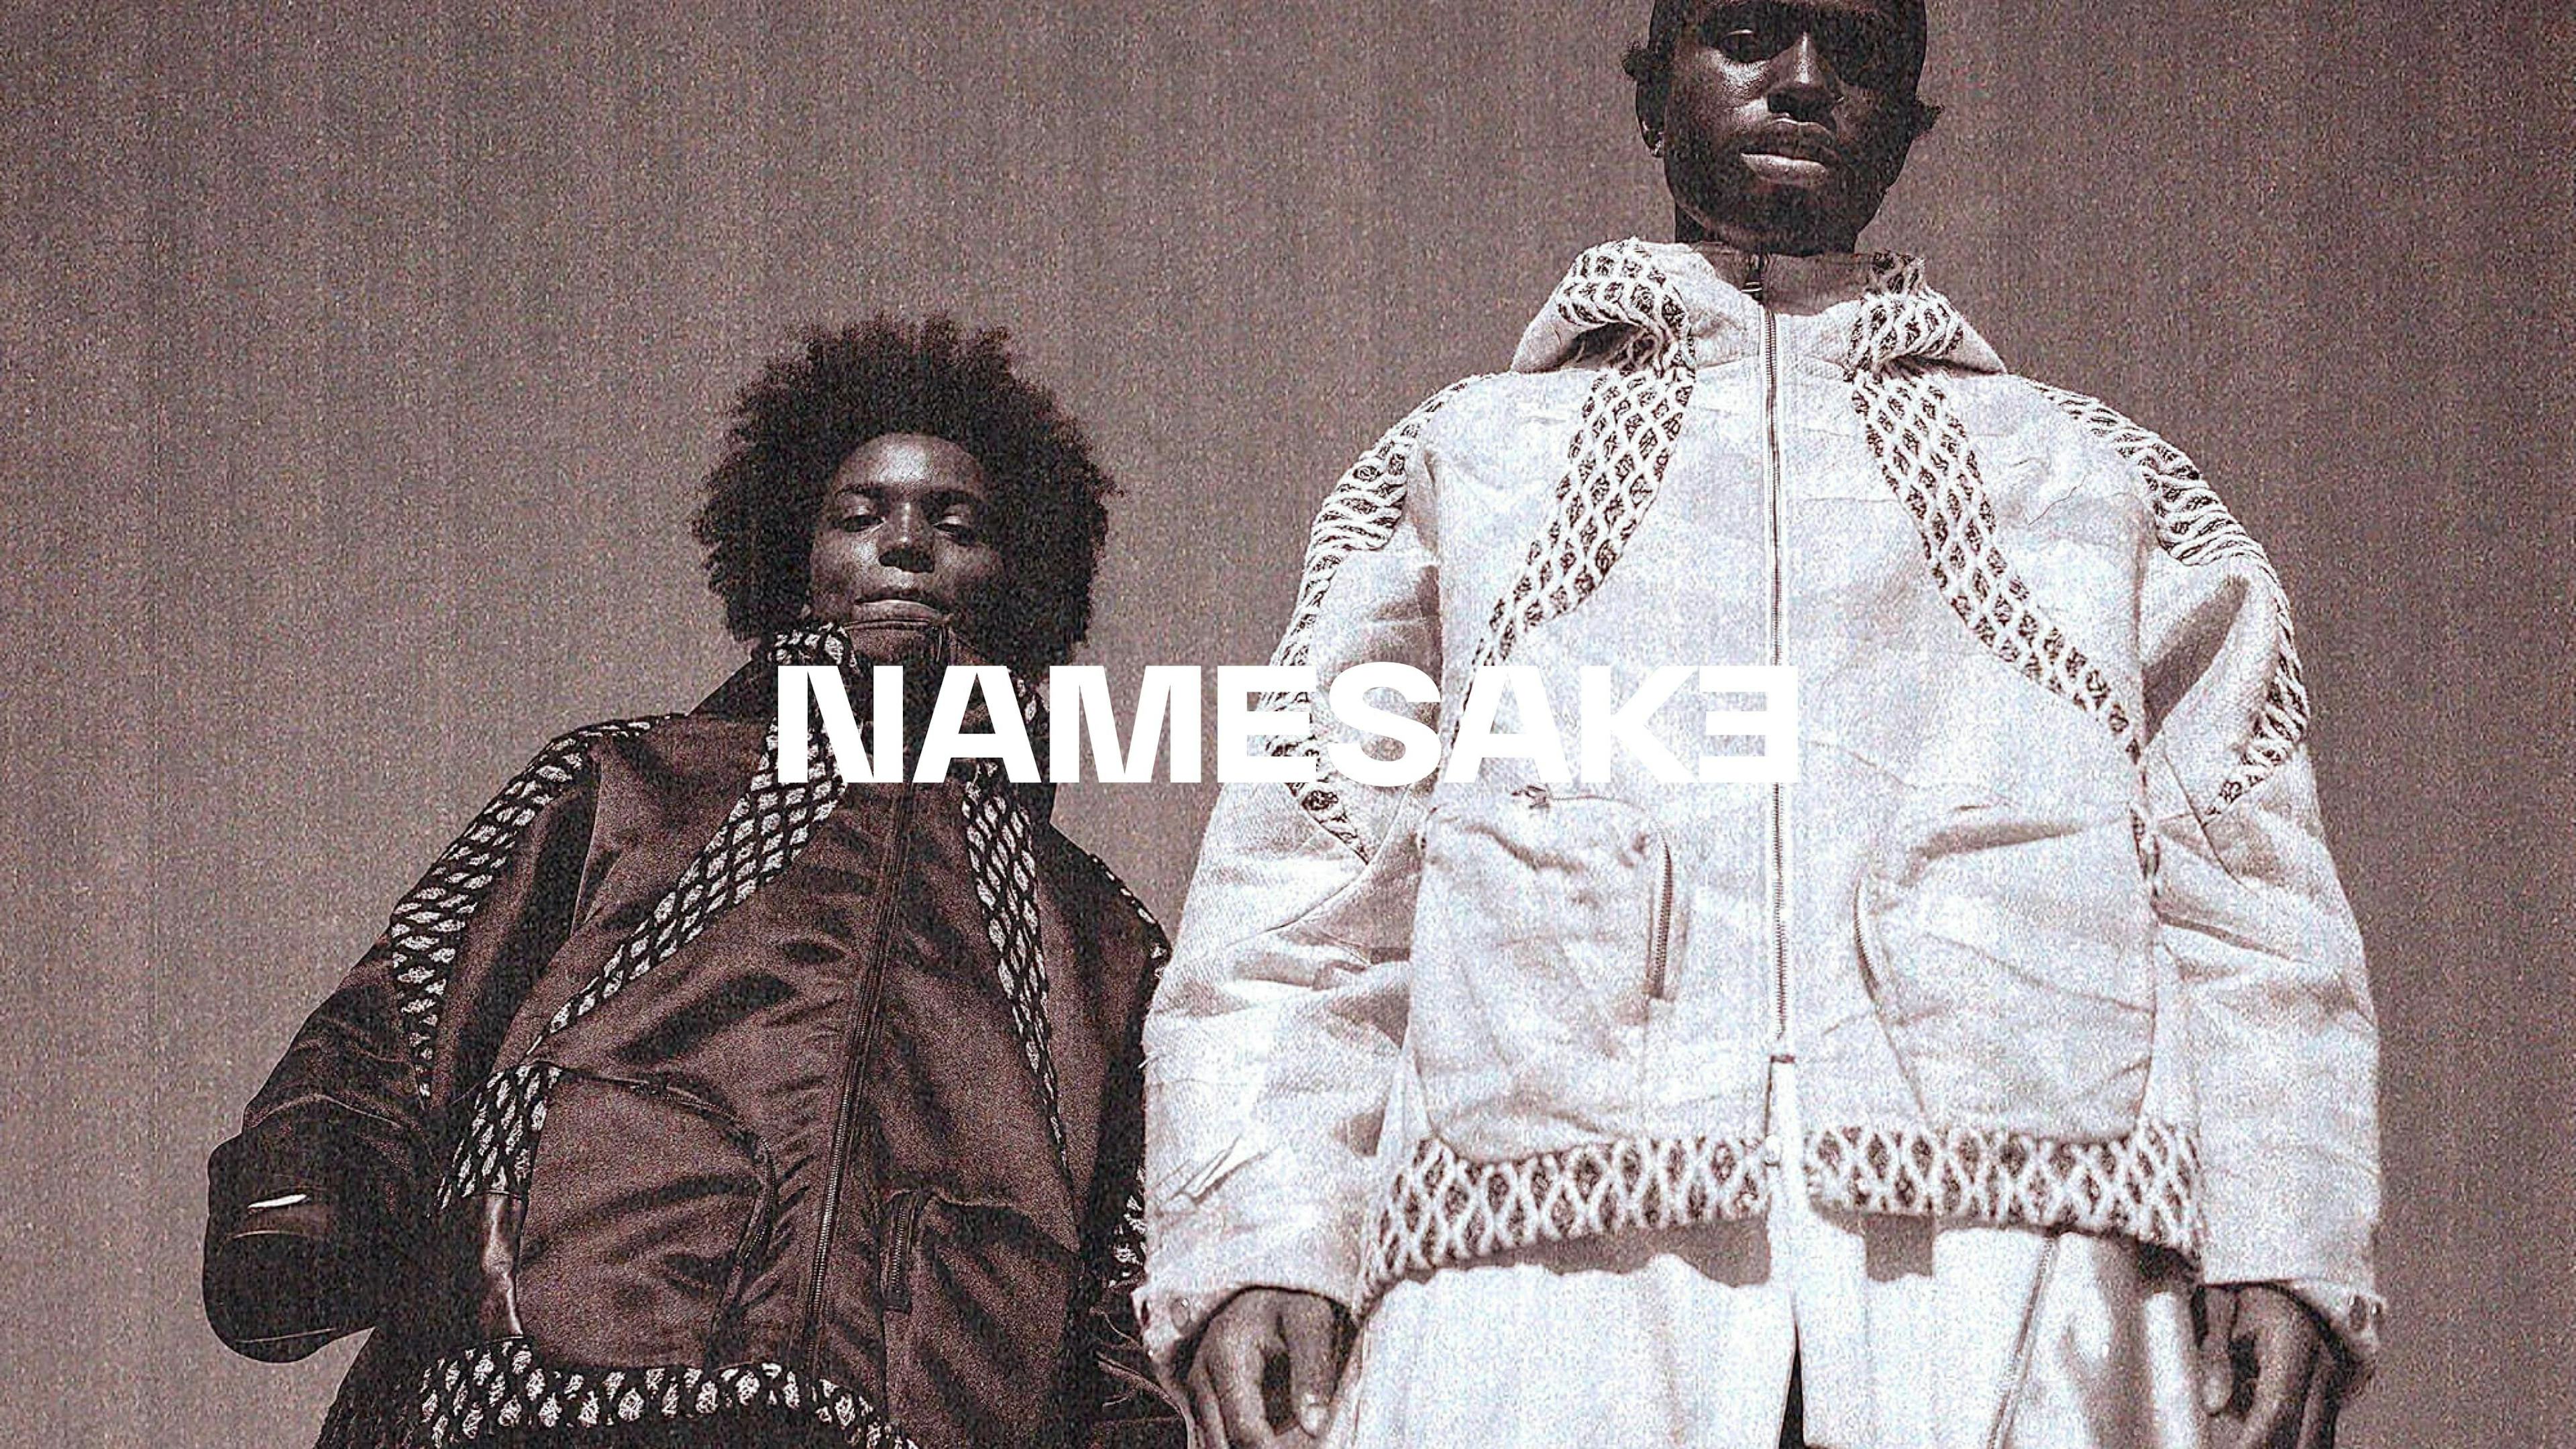 Responsive design, and development for Namesake, a fashion house founded by three brothers and their father as a dialogue between generations.